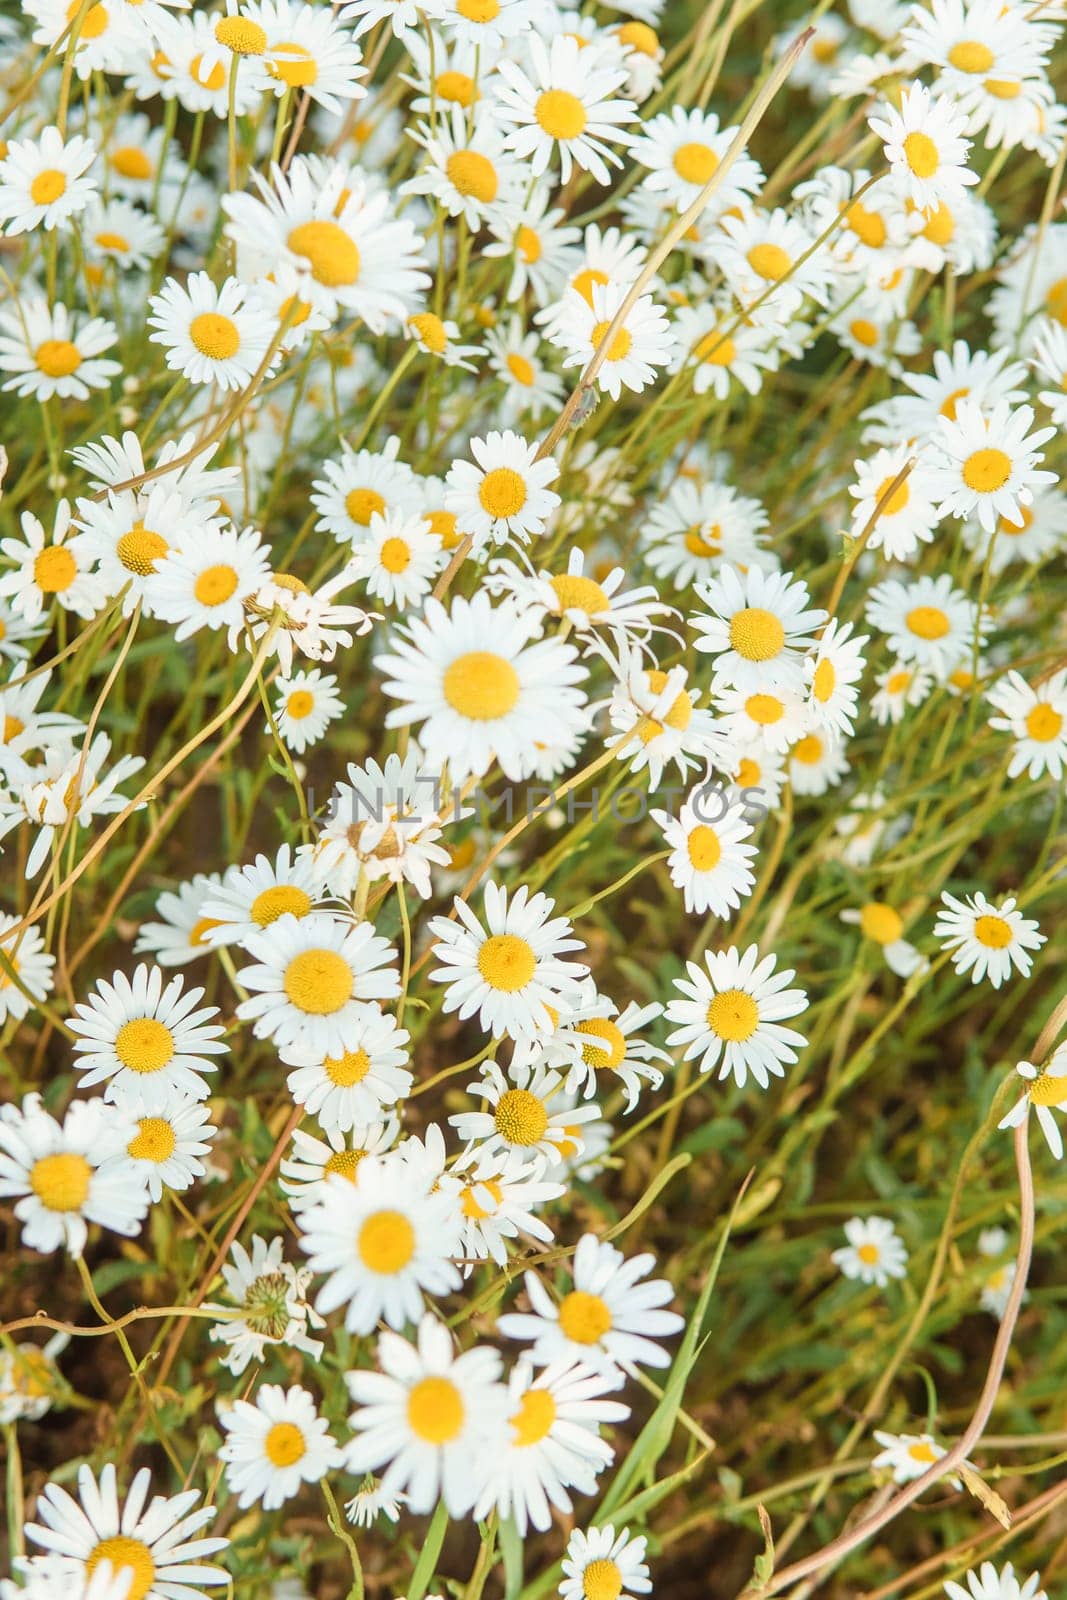 Chamomile flowers in close-up. A large field of flowering daisies. The concept of agriculture and the cultivation of useful medicinal herbs